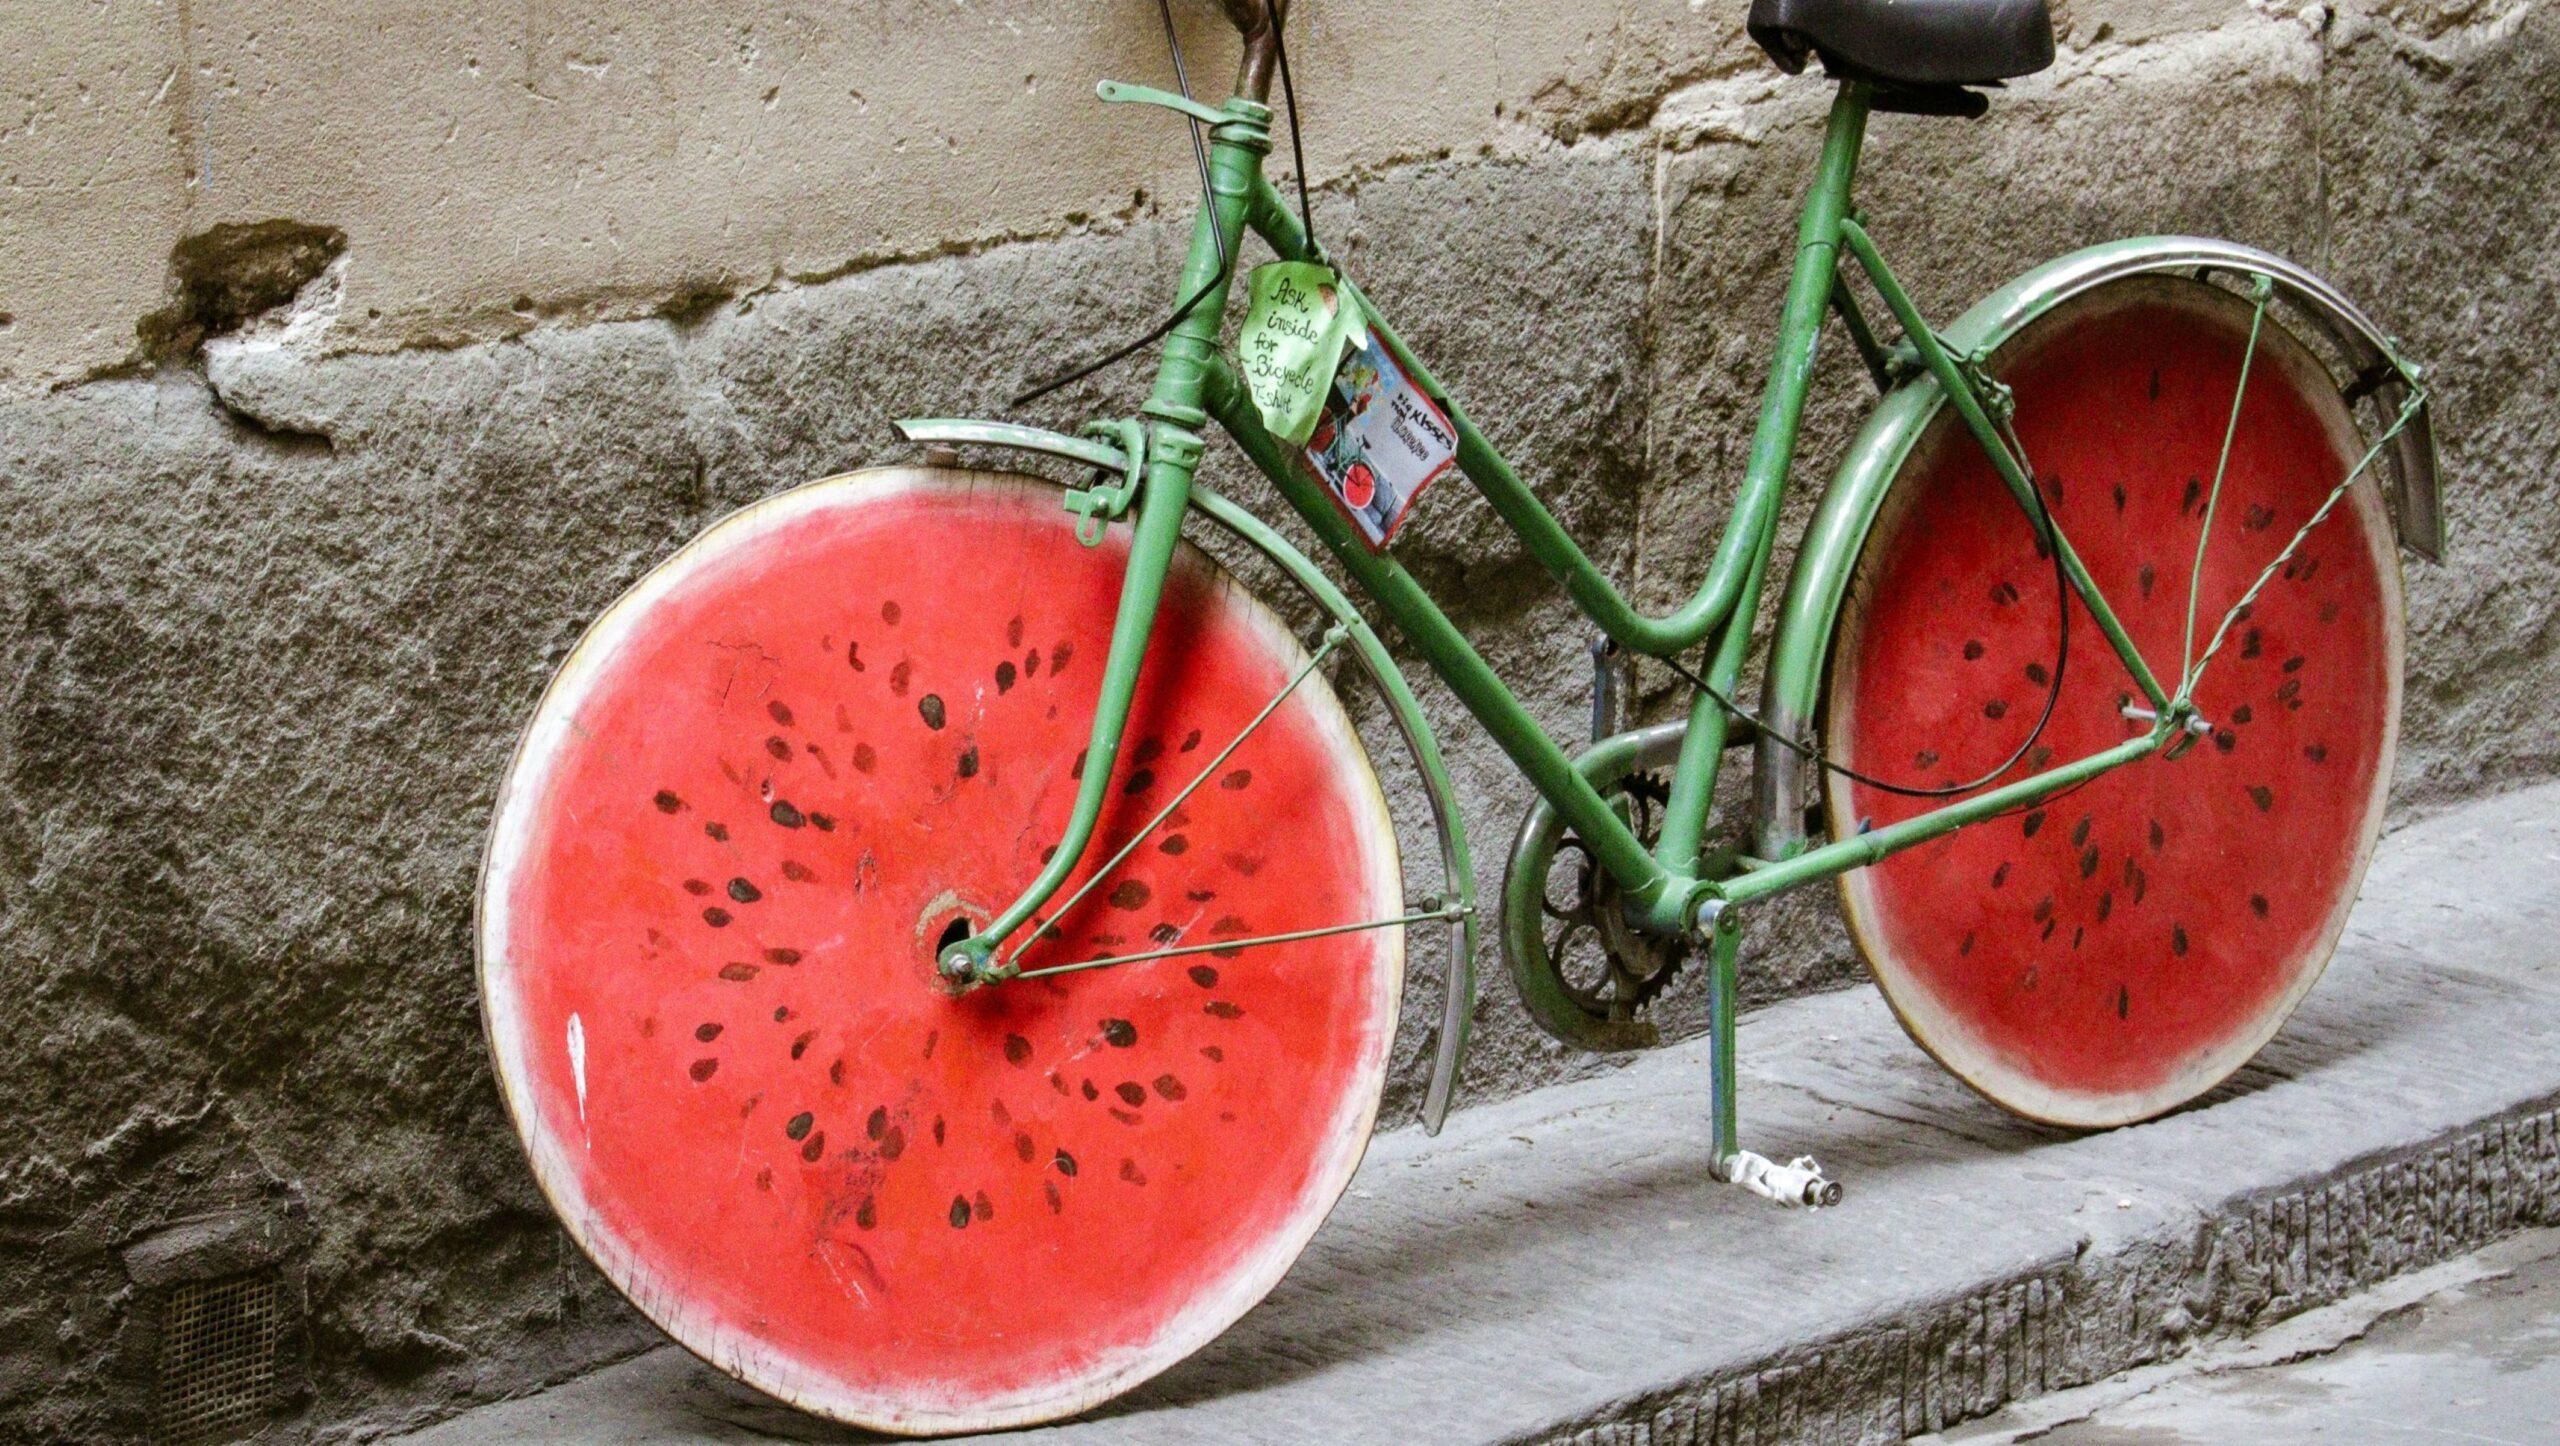 Green bike with watermelon-like wheels leaning up against a stone wall.